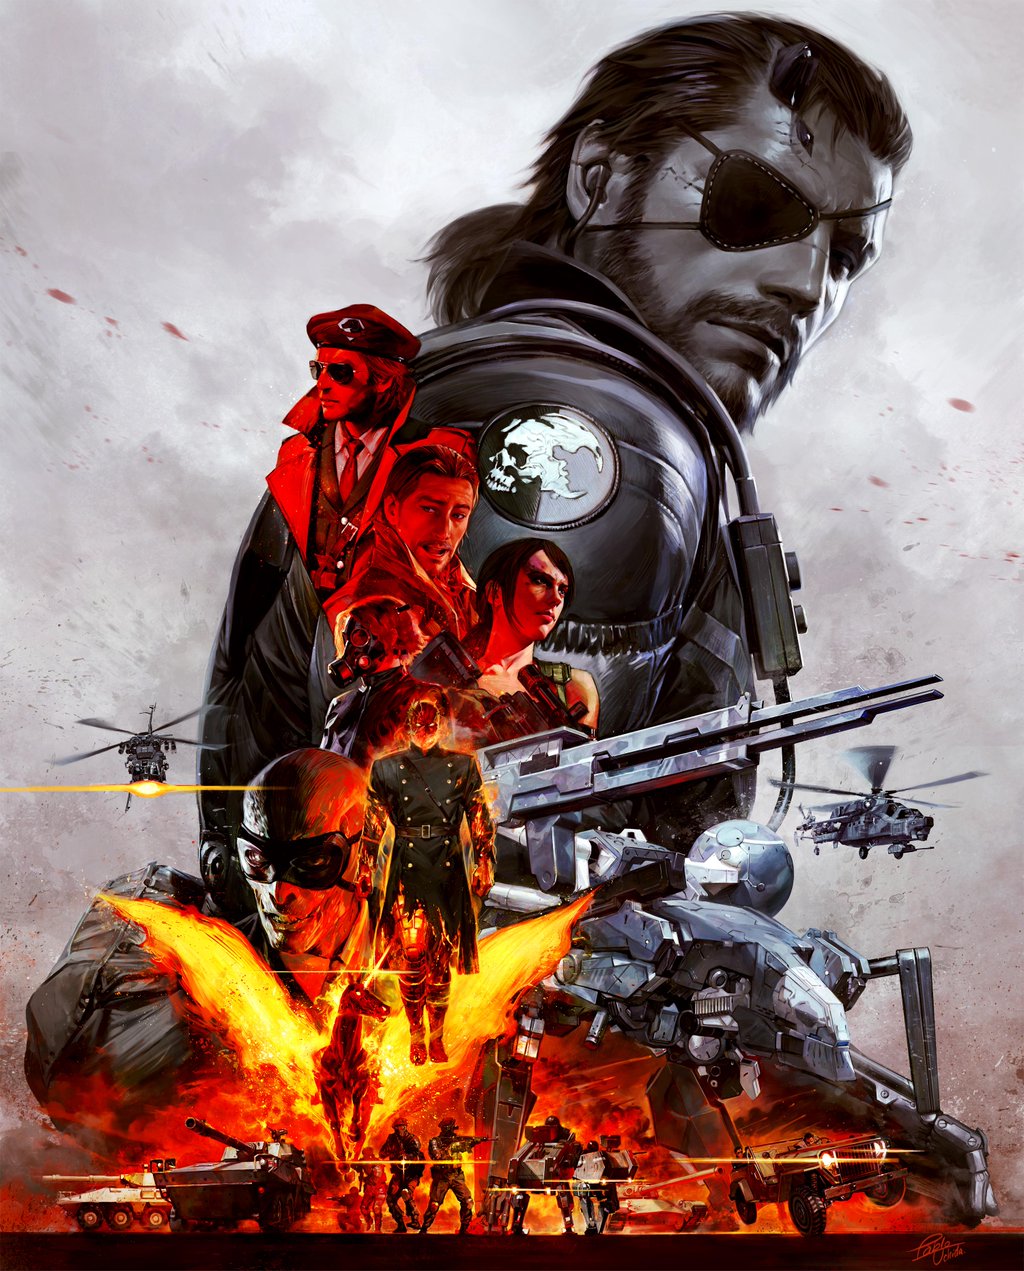 Konami reveals 'Metal Gear Solid: The Definitive Collection'